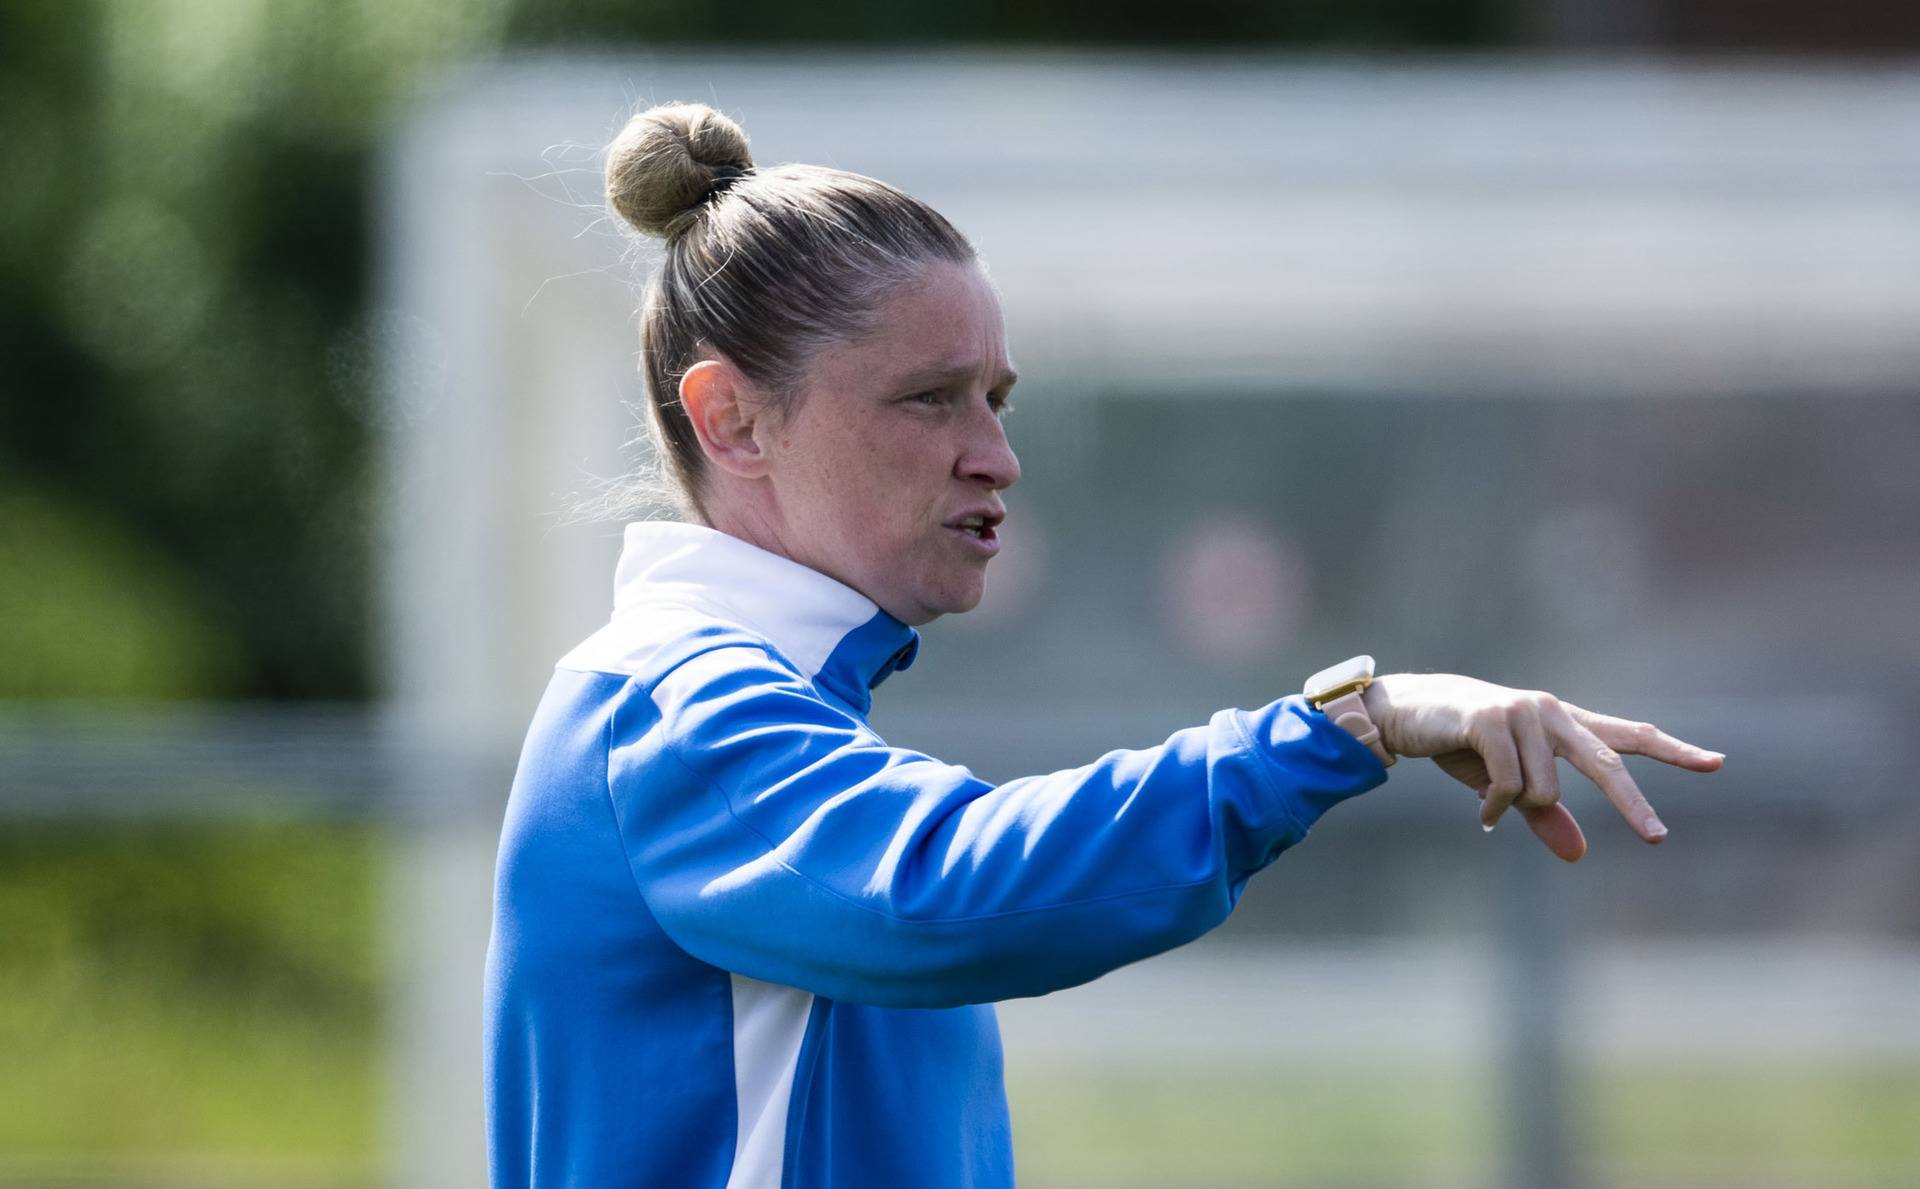 Glasgow City Head coach Leanne Ross knows a win at Ibrox will guarantee title.